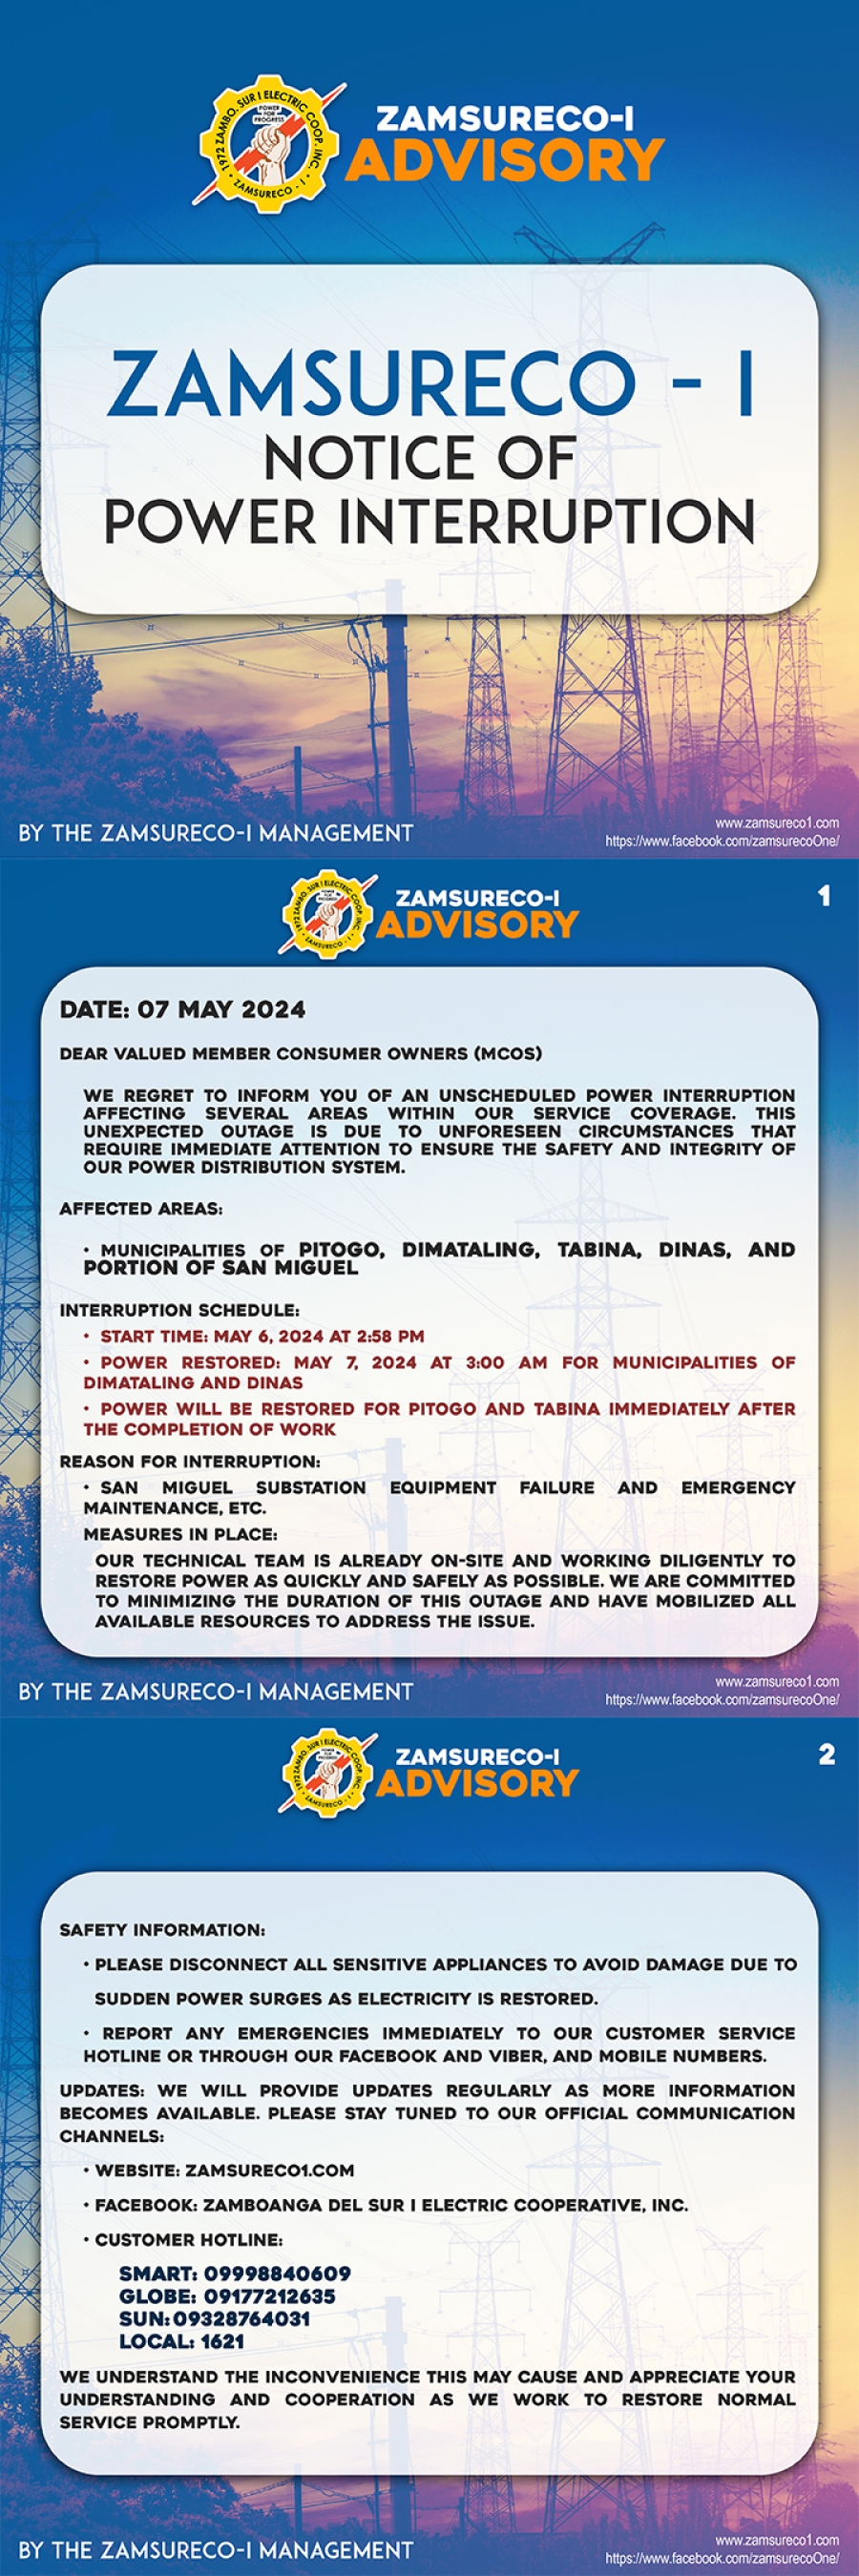 UNSCHEDULE POWER INTERRUPTION (MAY 6-7, 2024) between 2:58 PM - 3:00 AM